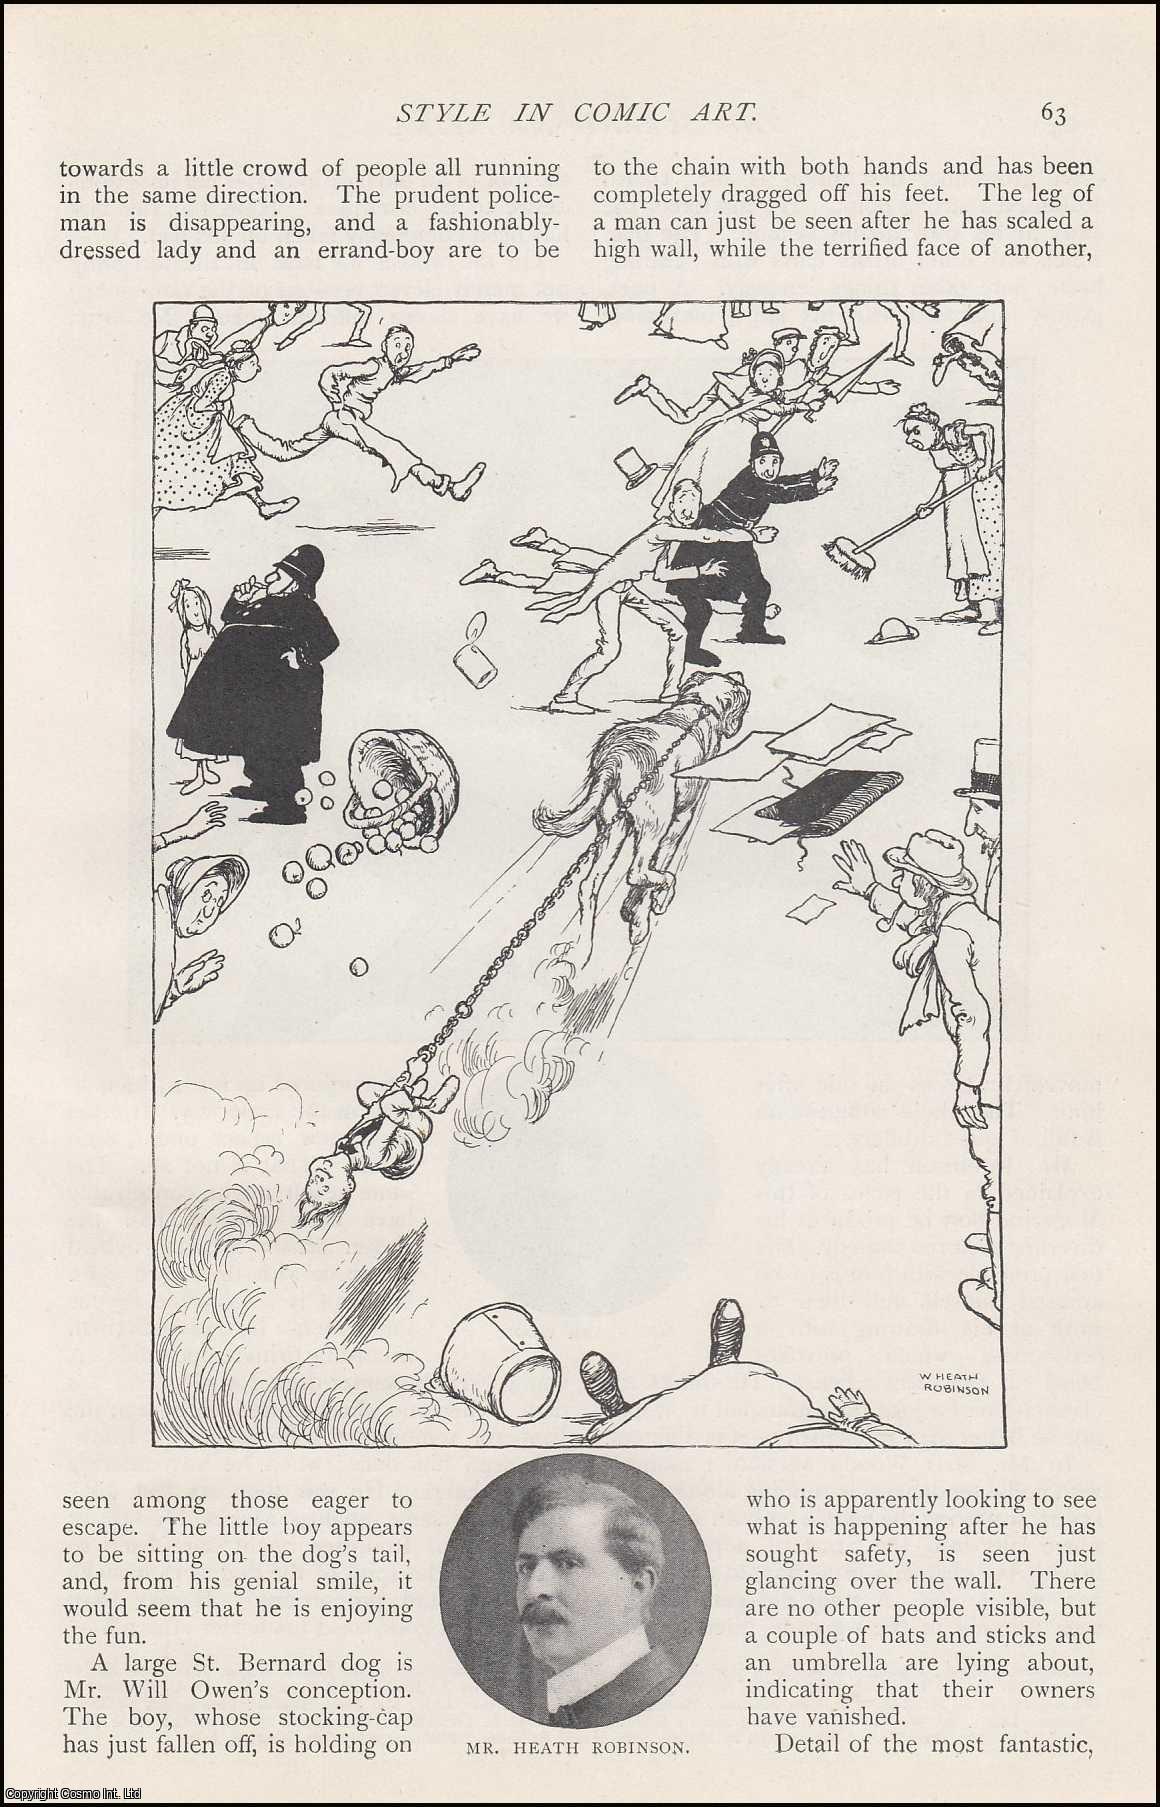 No Author Stated - Style in Comic Art. An uncommon original article from The Strand Magazine, 1909.